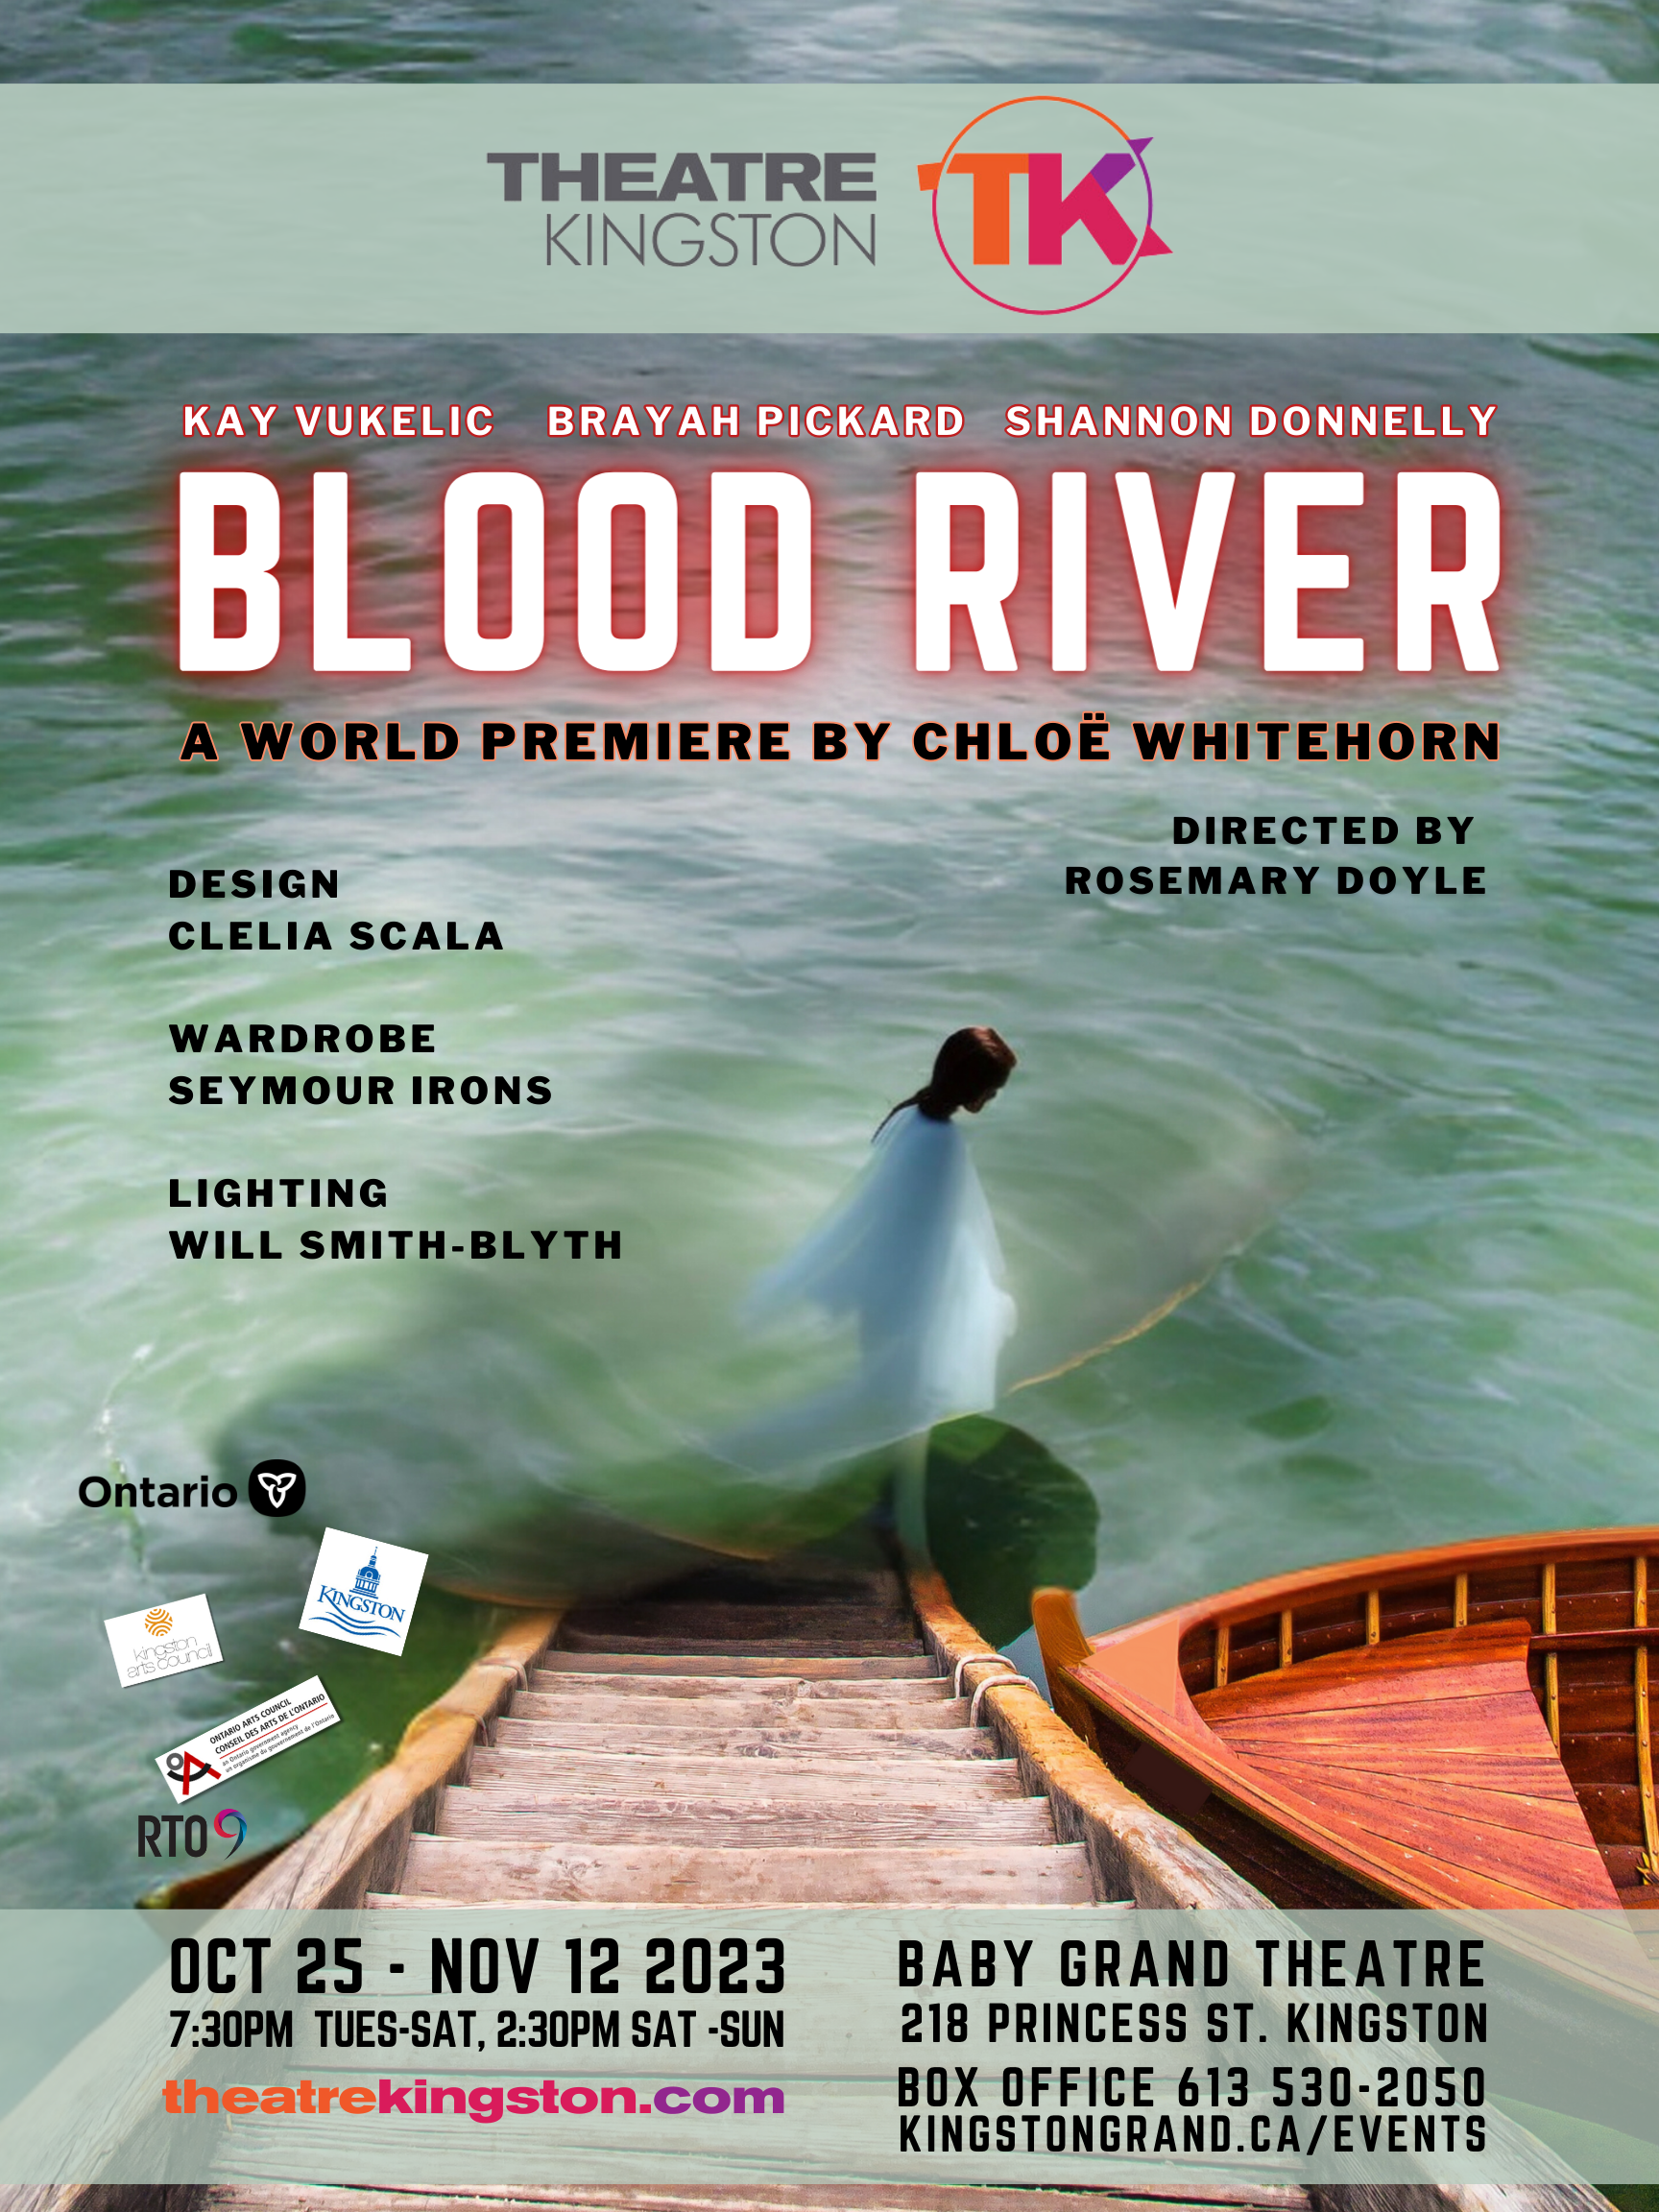 Poster for Theatre Kingston's production of 'Blood Rover'. A woman is standing at the end of a dock on the poster. The title, showtimes, cast, director, wardrobe, lighting, and design are listed on the poster.